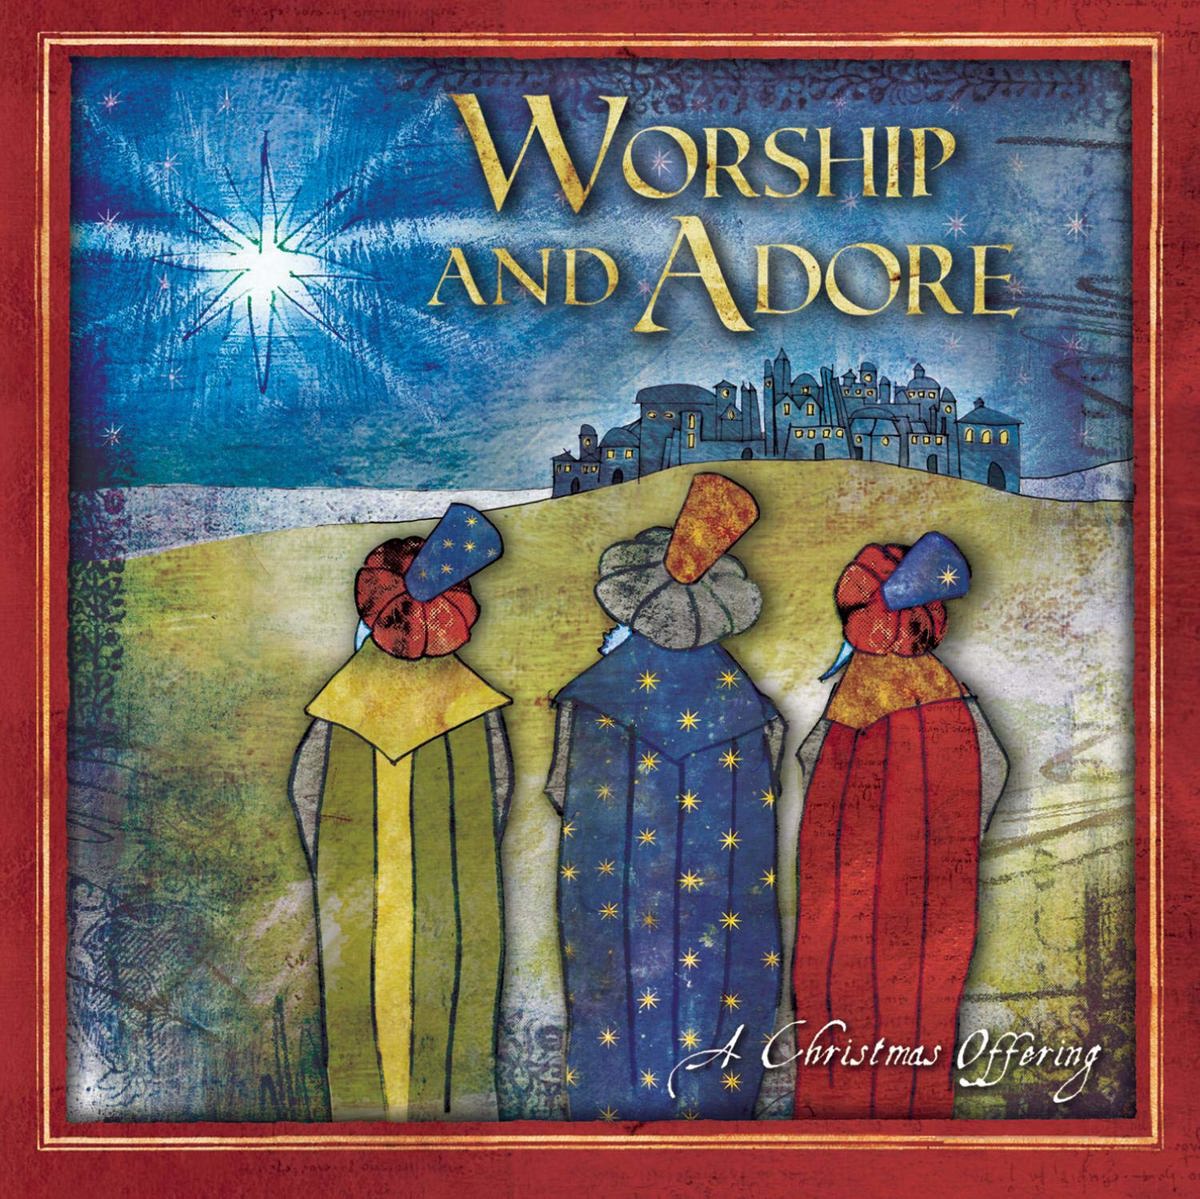 Worship and Adore